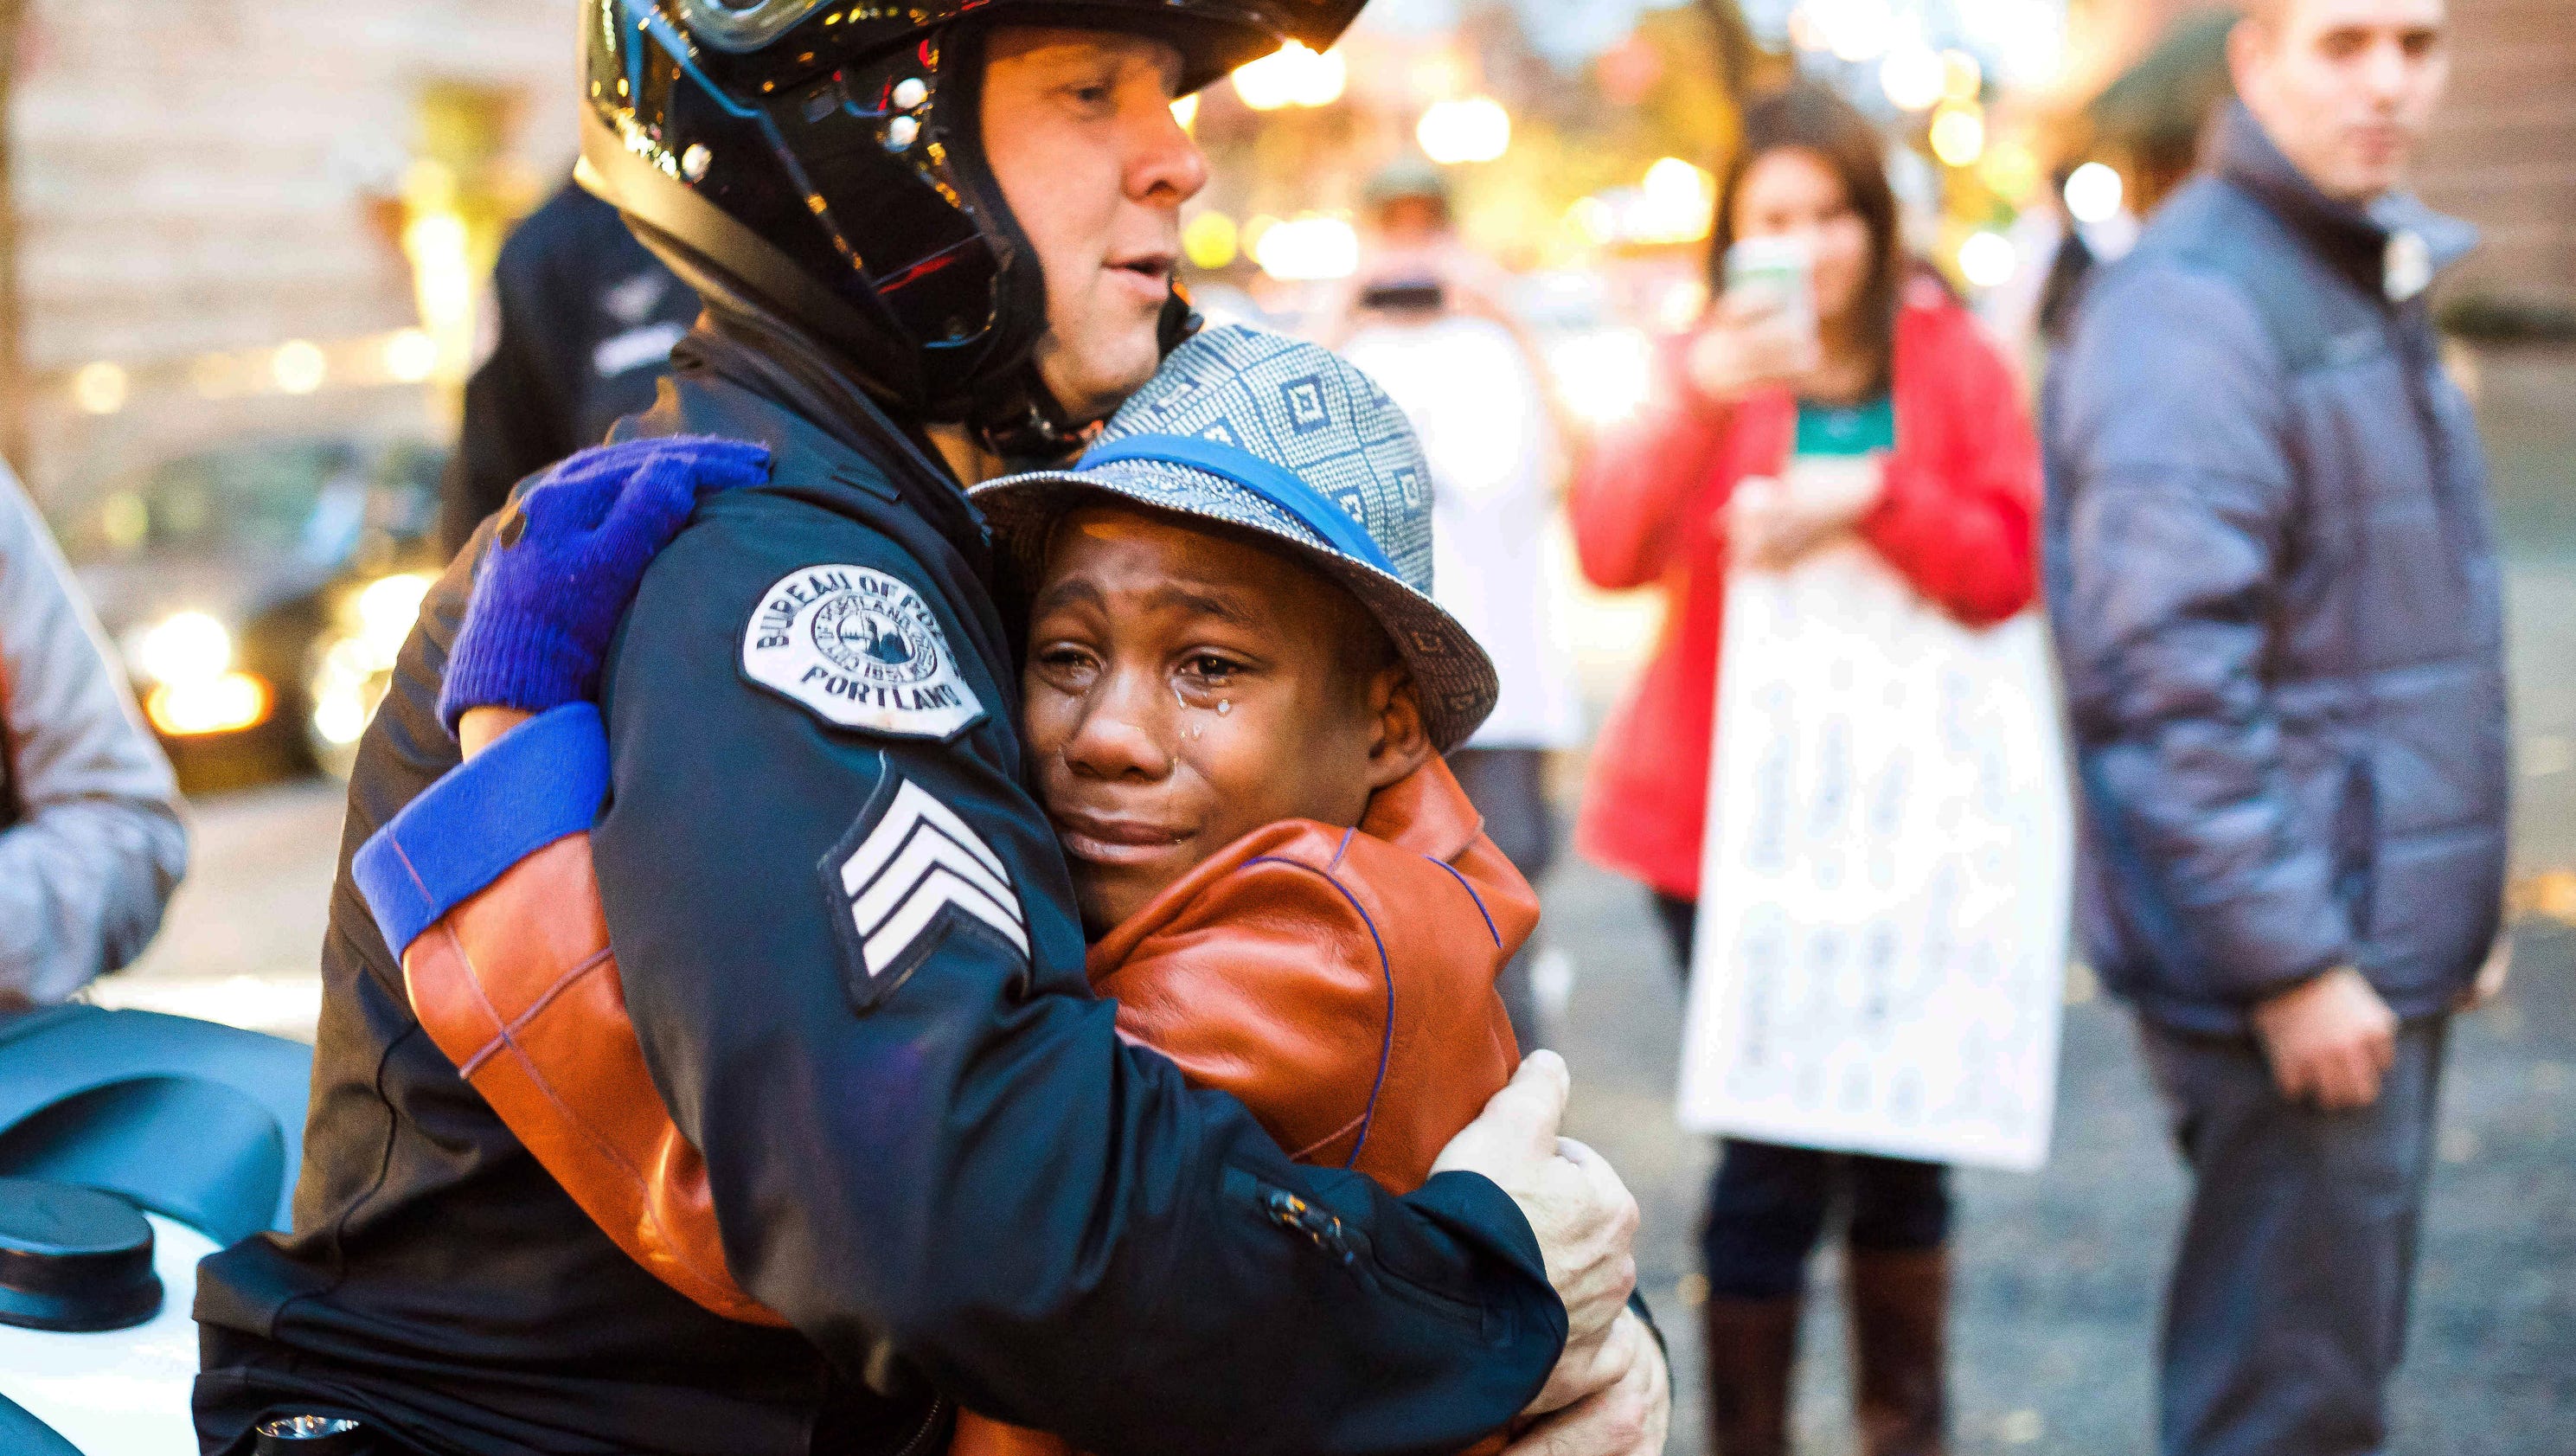 Photo: Police officer and protester share tearful hug3200 x 1680